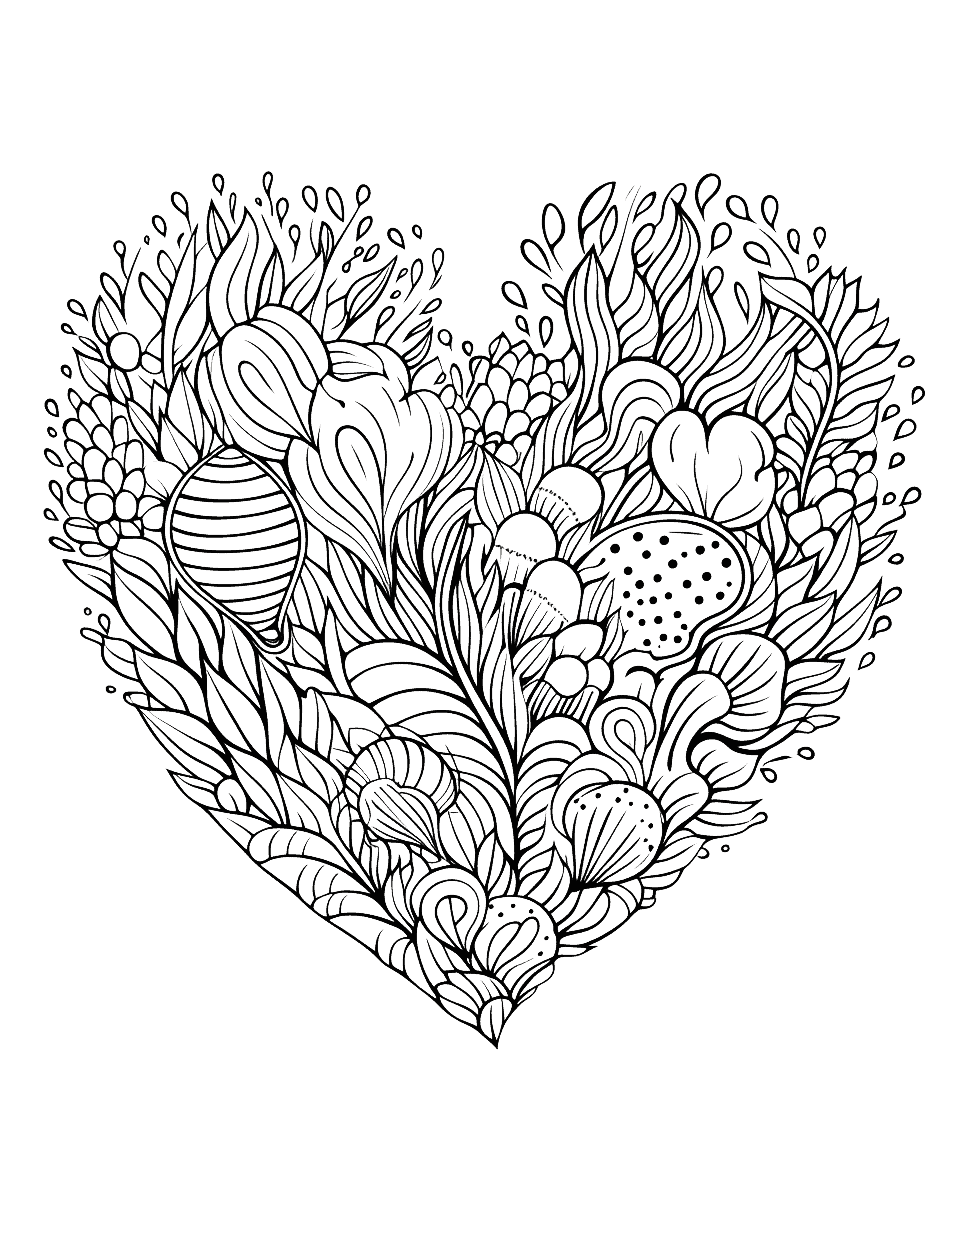 Underwater Heart Coloring Page - A heart-shaped coral in a lively underwater scene.